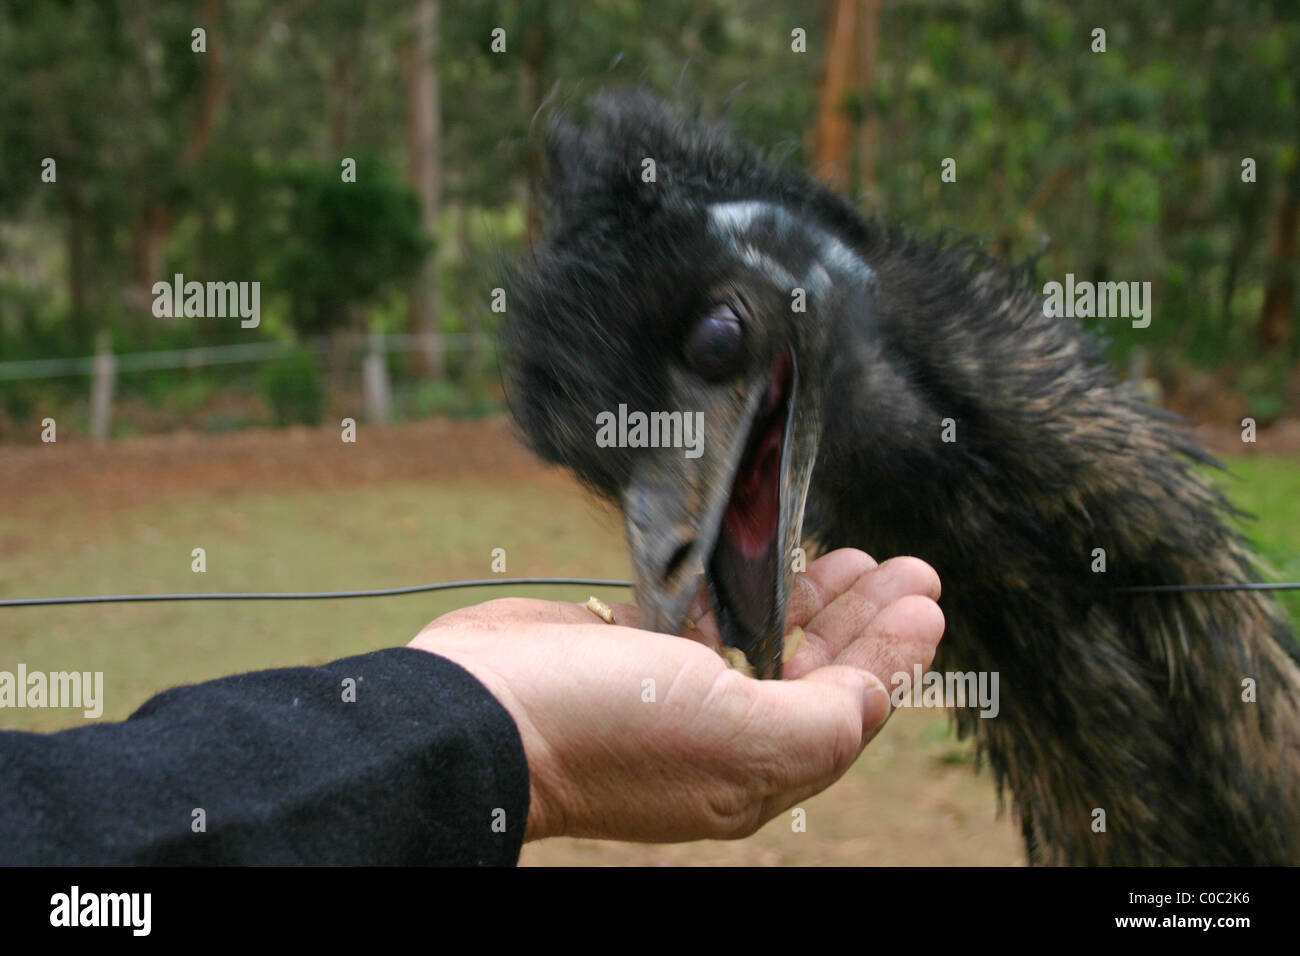 Emu eating out of hand Stock Photo